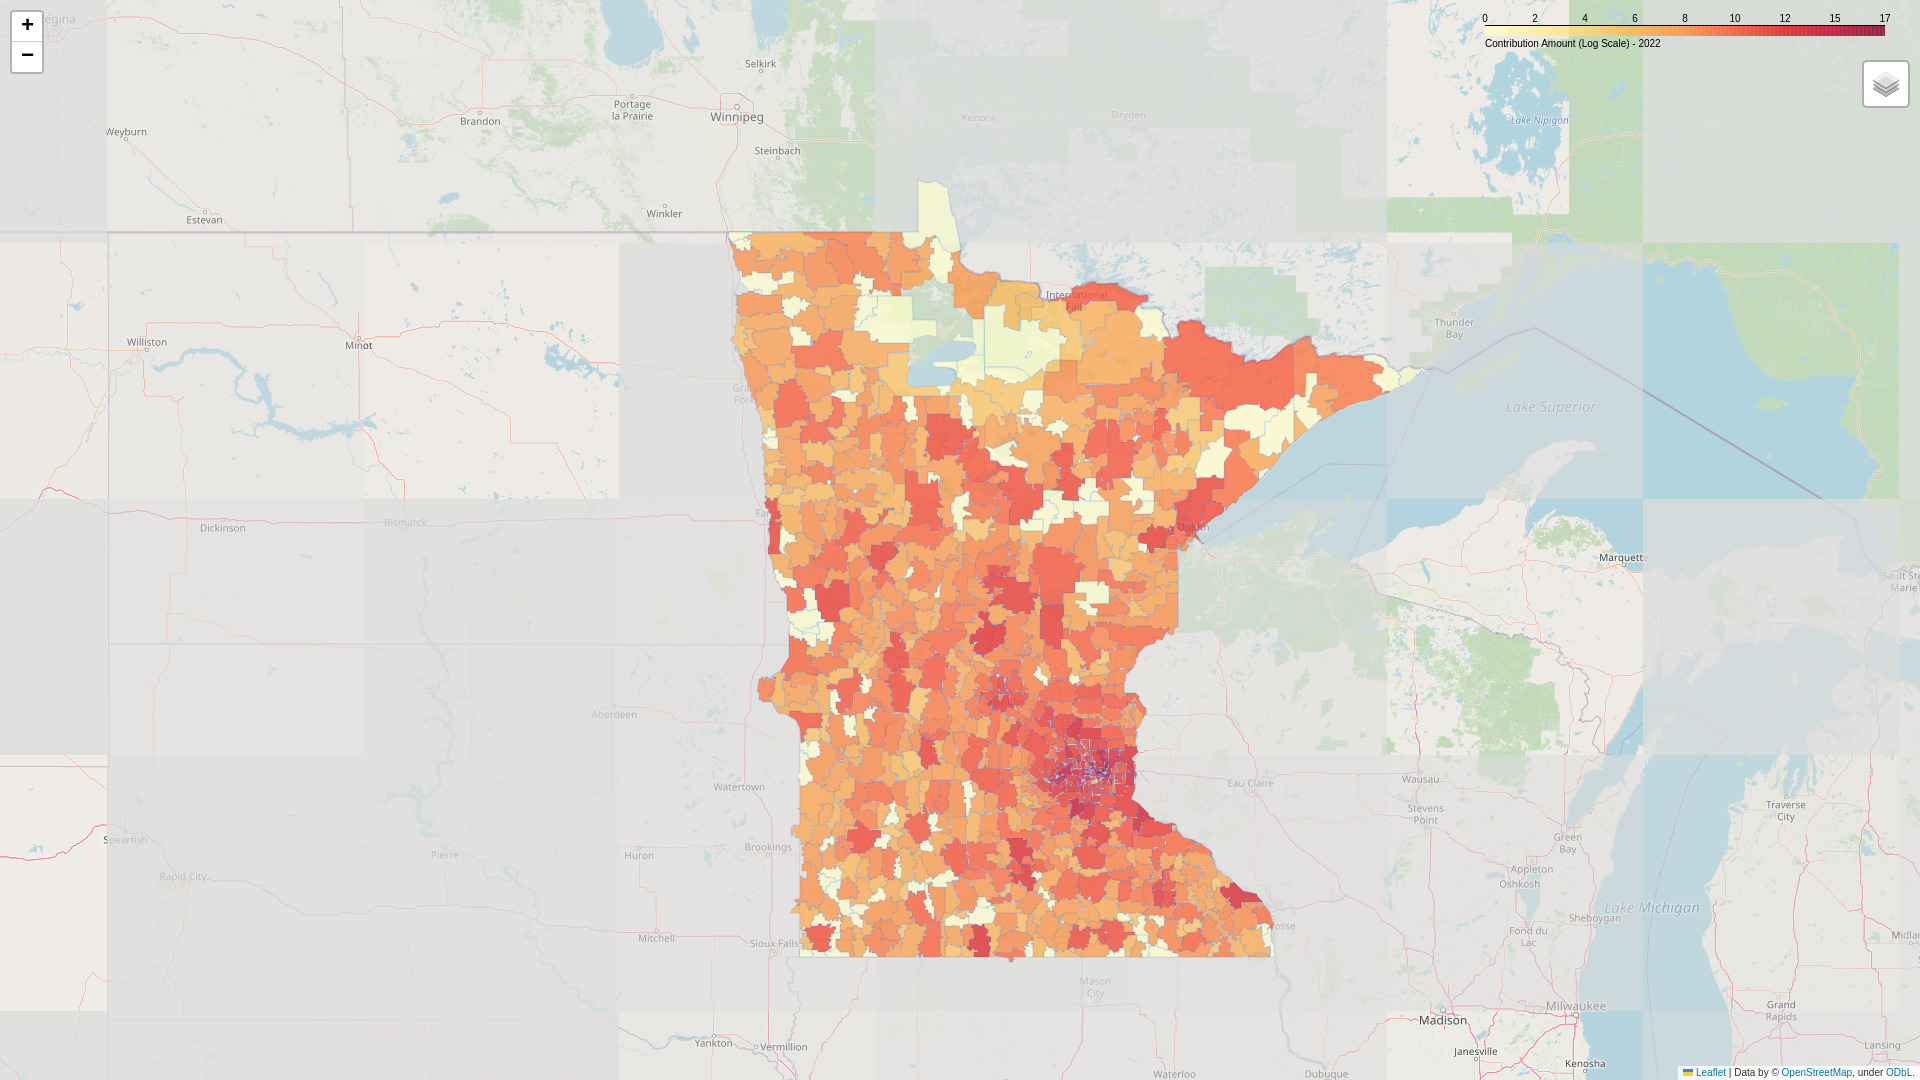 Mapping Minnesota Campaign Contributions: A Zip Code Perspective